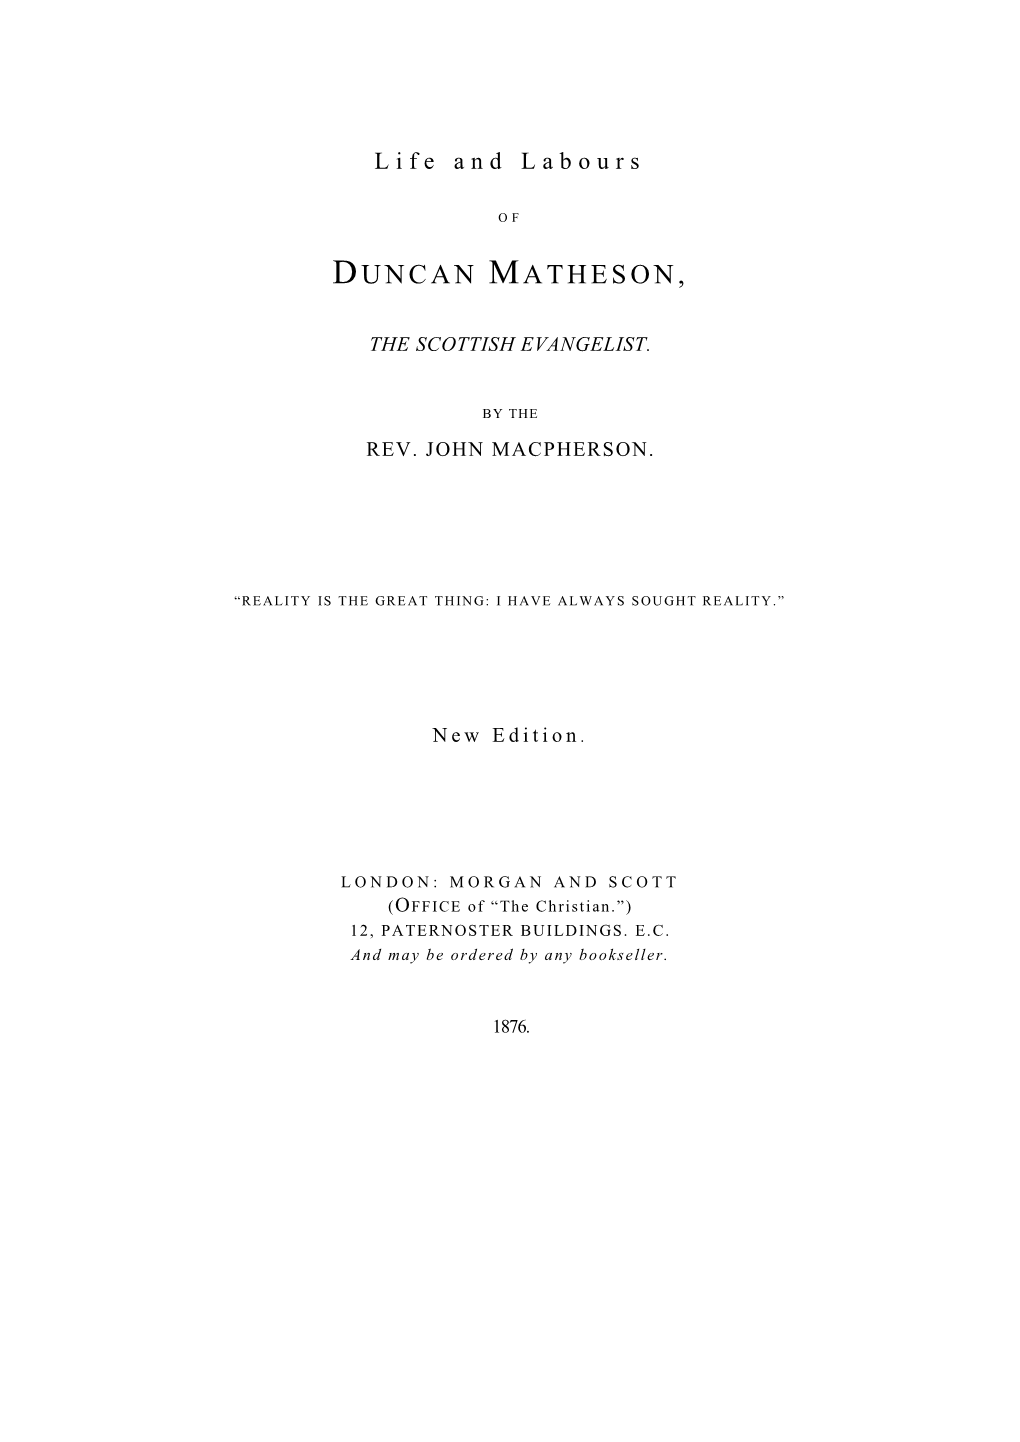 Life and Labours of Duncan Matheson, the Scottish Evangelist